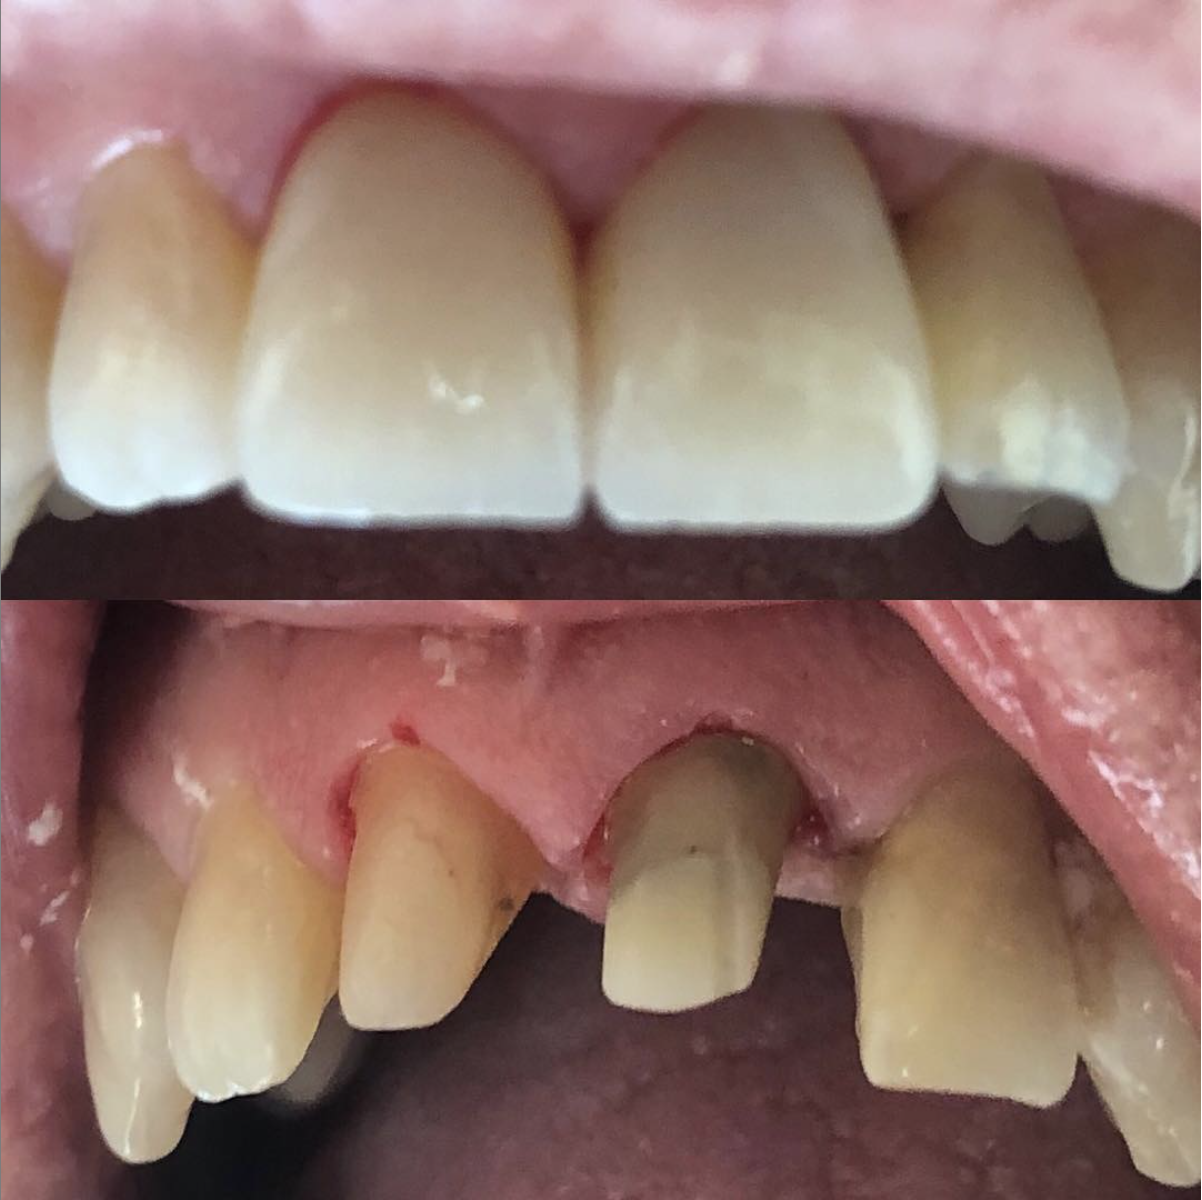 2 porcelain crowns for front teeth